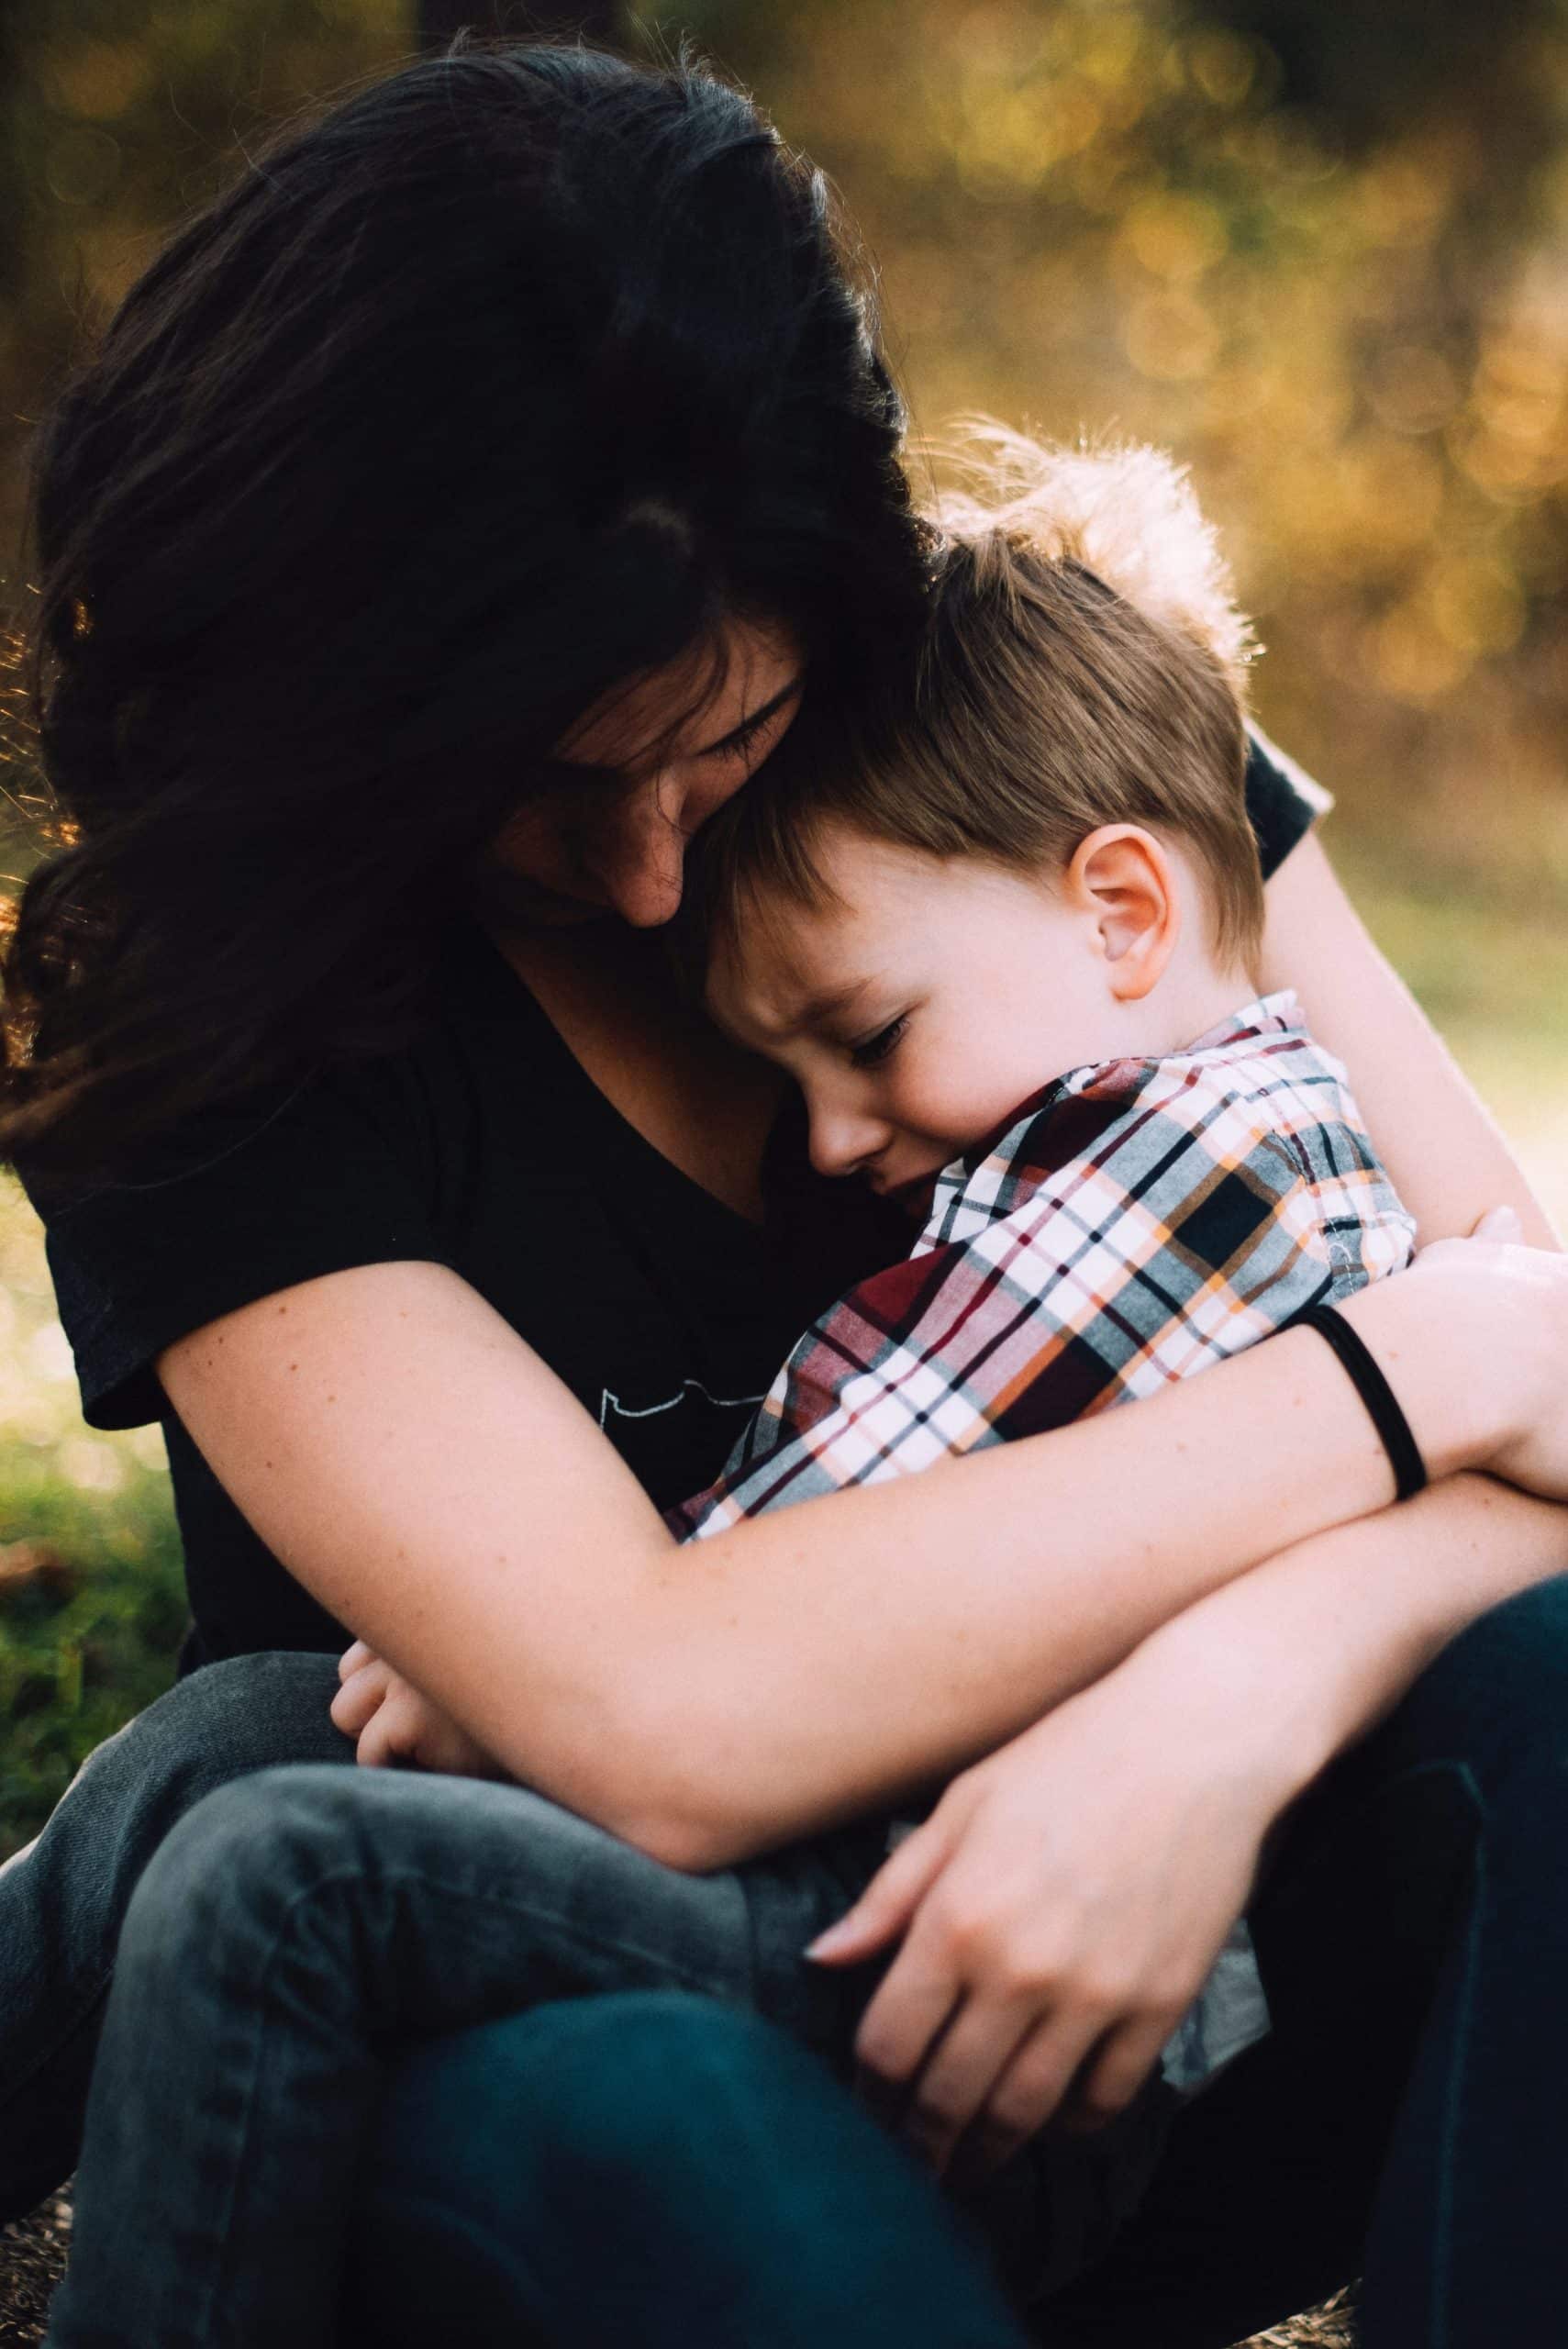 A mom hugs her son. A tight hug can really help a child who is feeling anxious or having a panic attack.